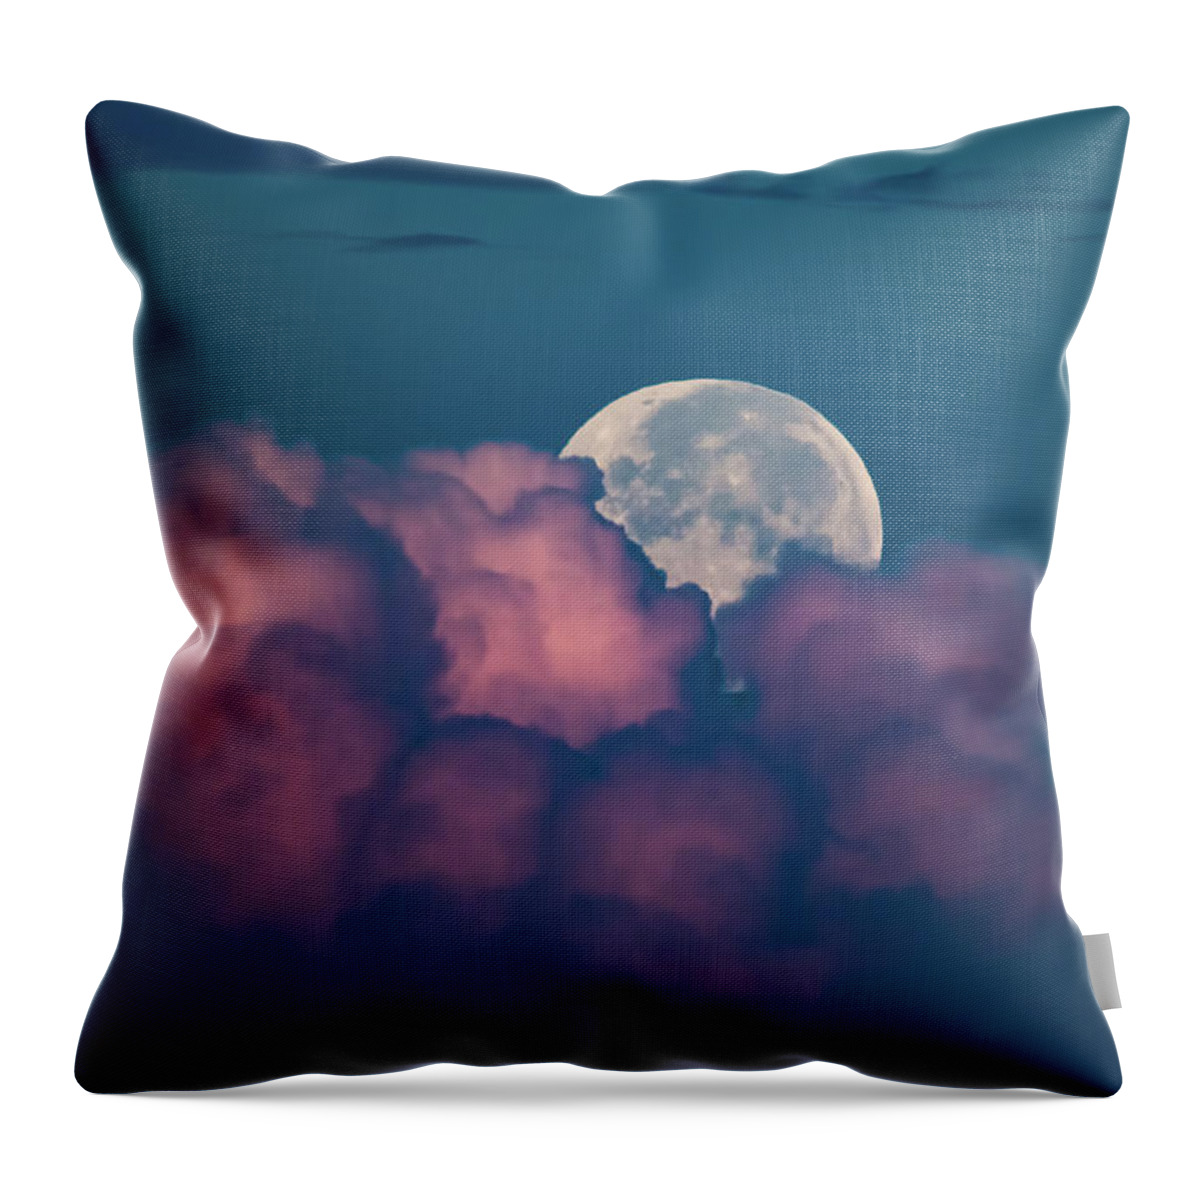 Sky Throw Pillow featuring the photograph Full Moon Setting Behind Pink Clouds by Artful Imagery